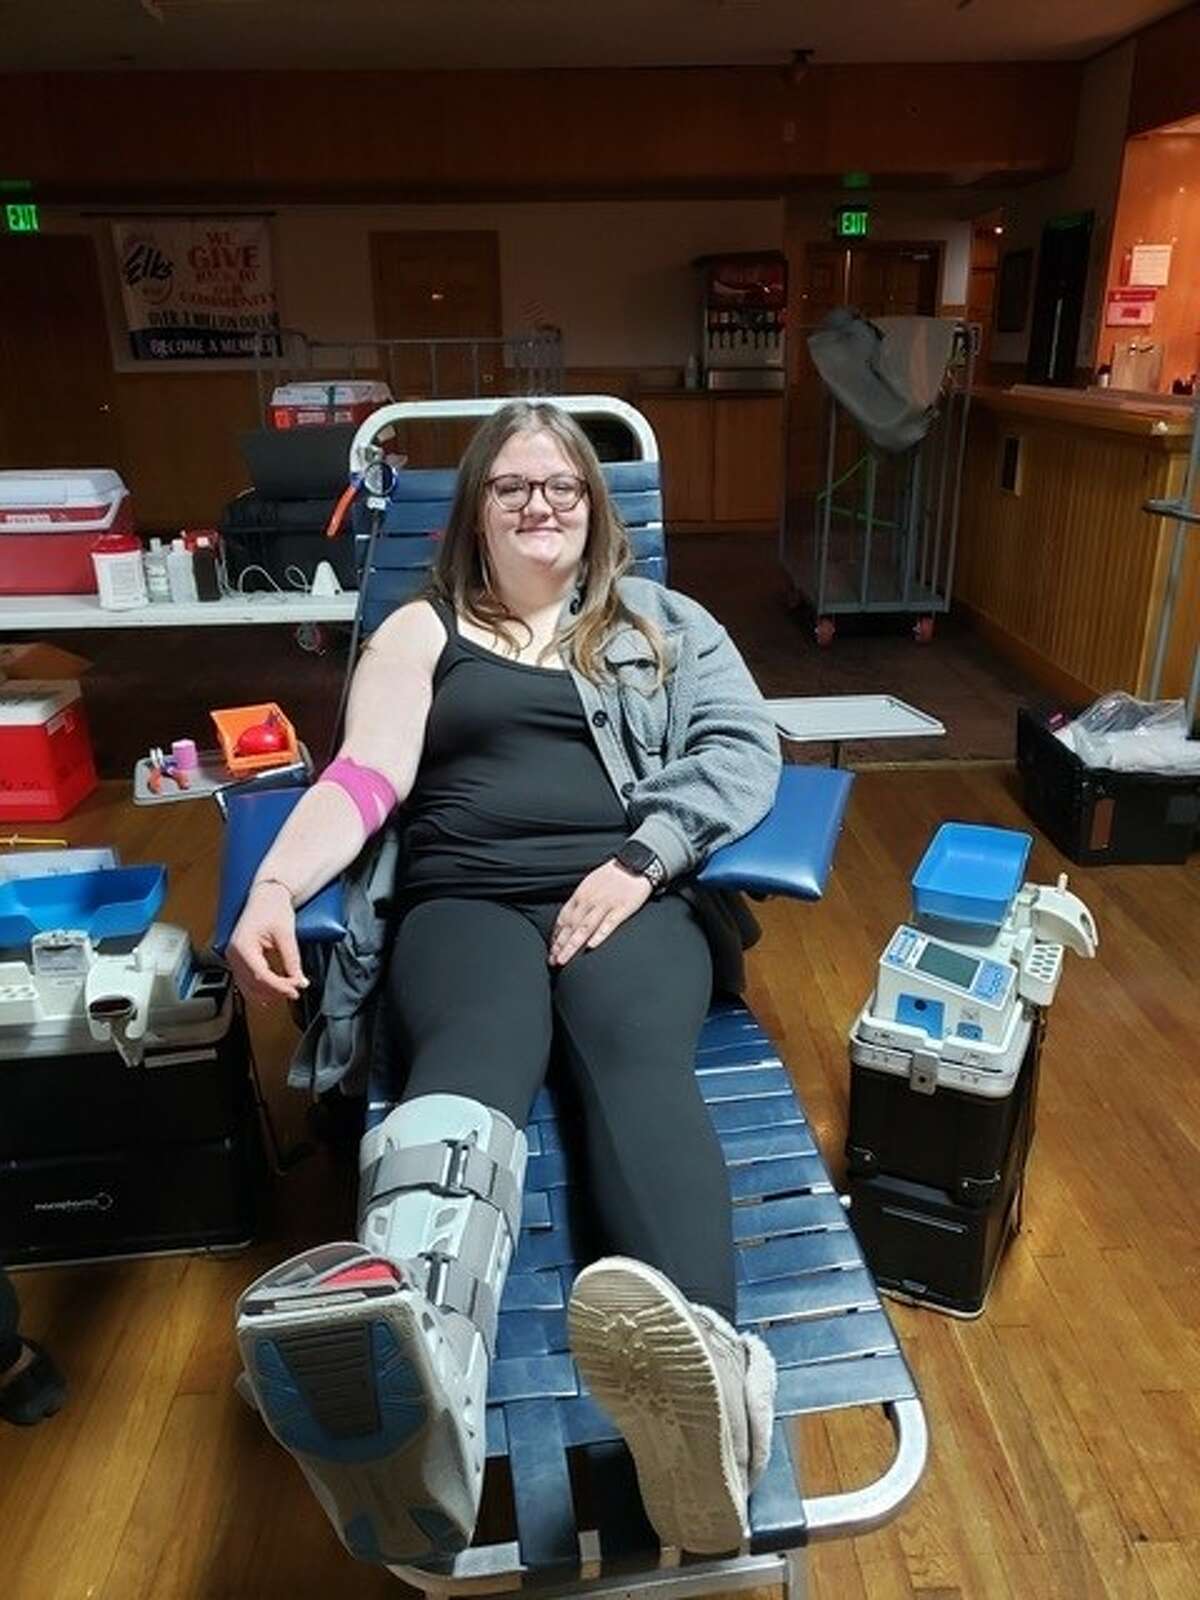 Standard City’s Darcy Cummings donates blood for the first time during the Carlinville Area Hospital Auxiliary’s Jan. 4 blood drive.